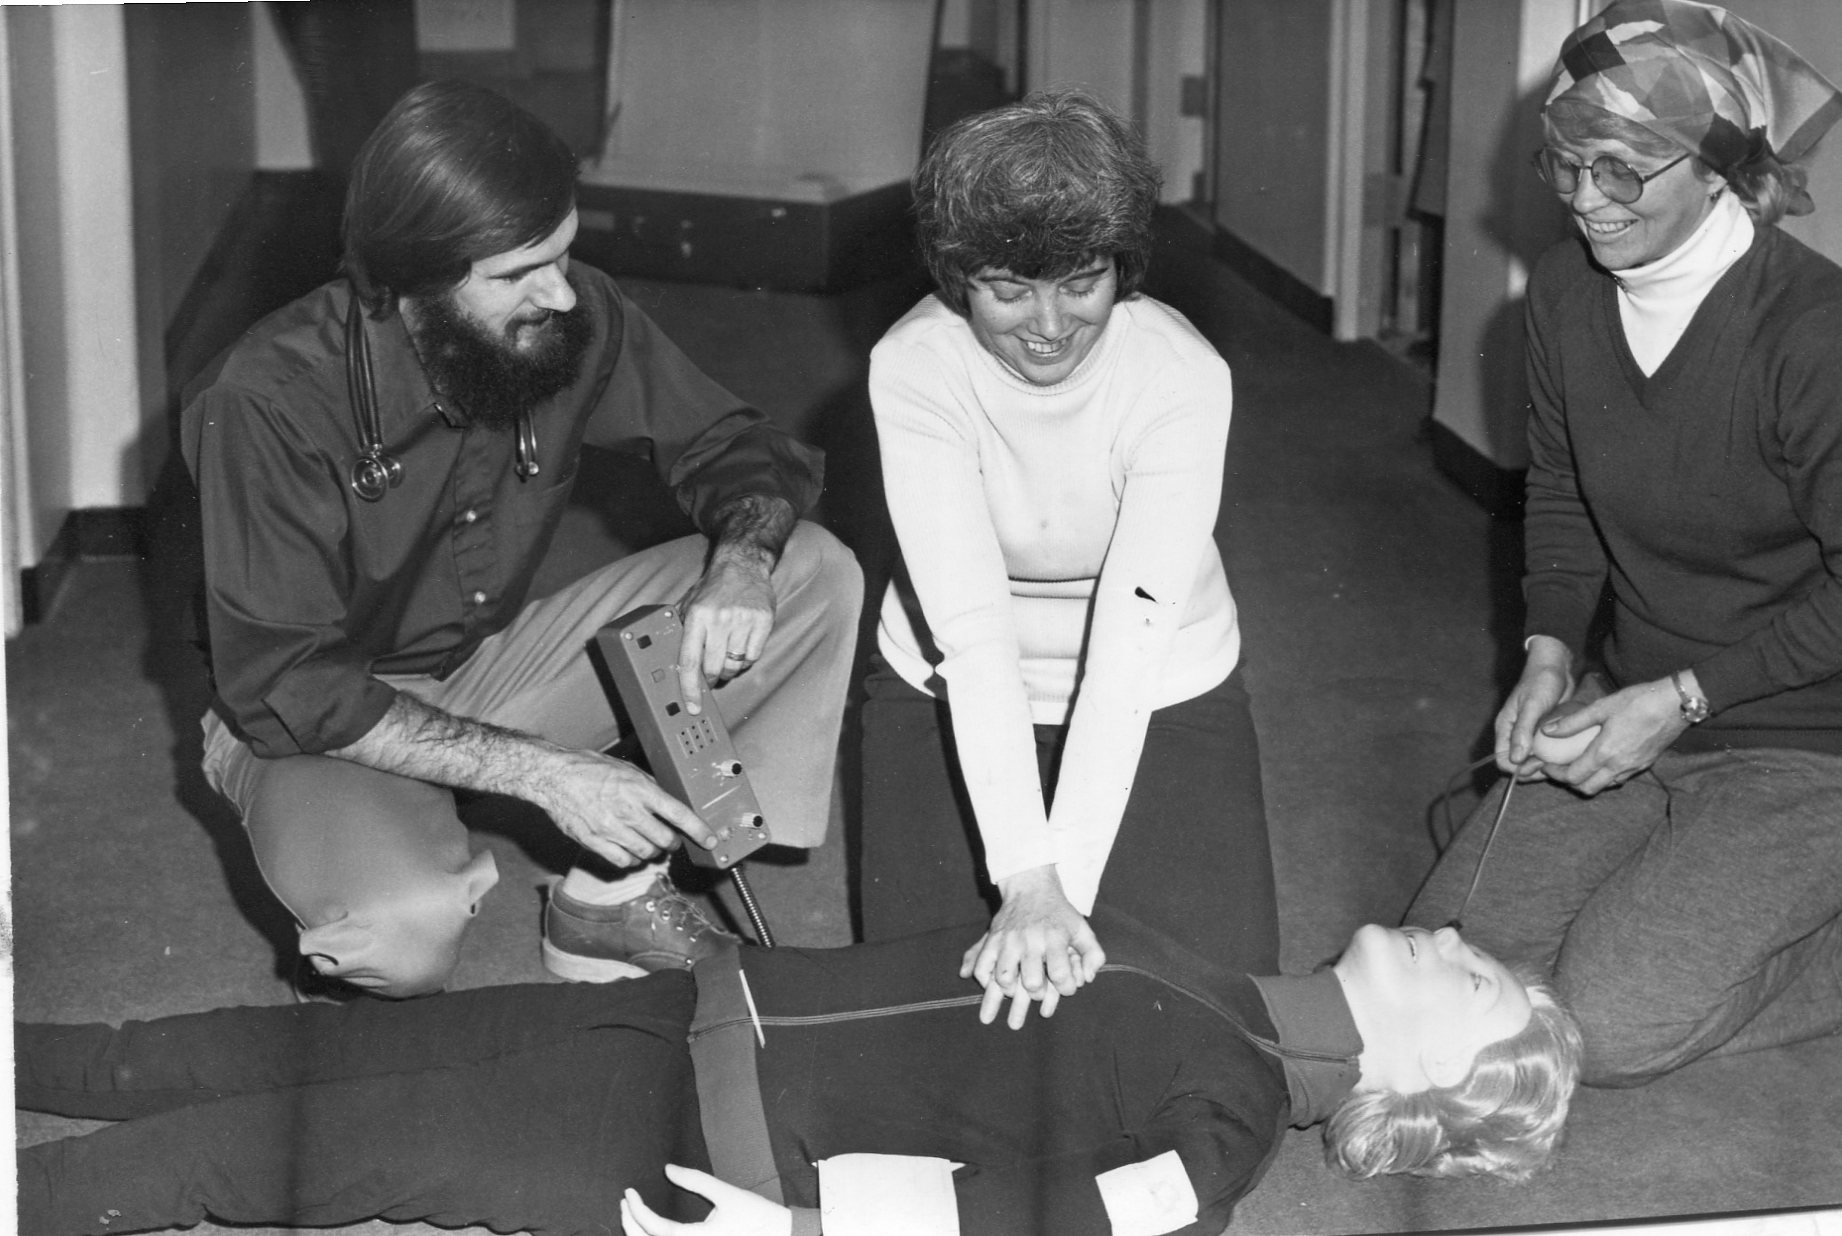   Dr. David Johnson was instructing Carol Merrihew and Jane Johnson on the techniques of CPR with Resuscitation Annie in the 1980s.  